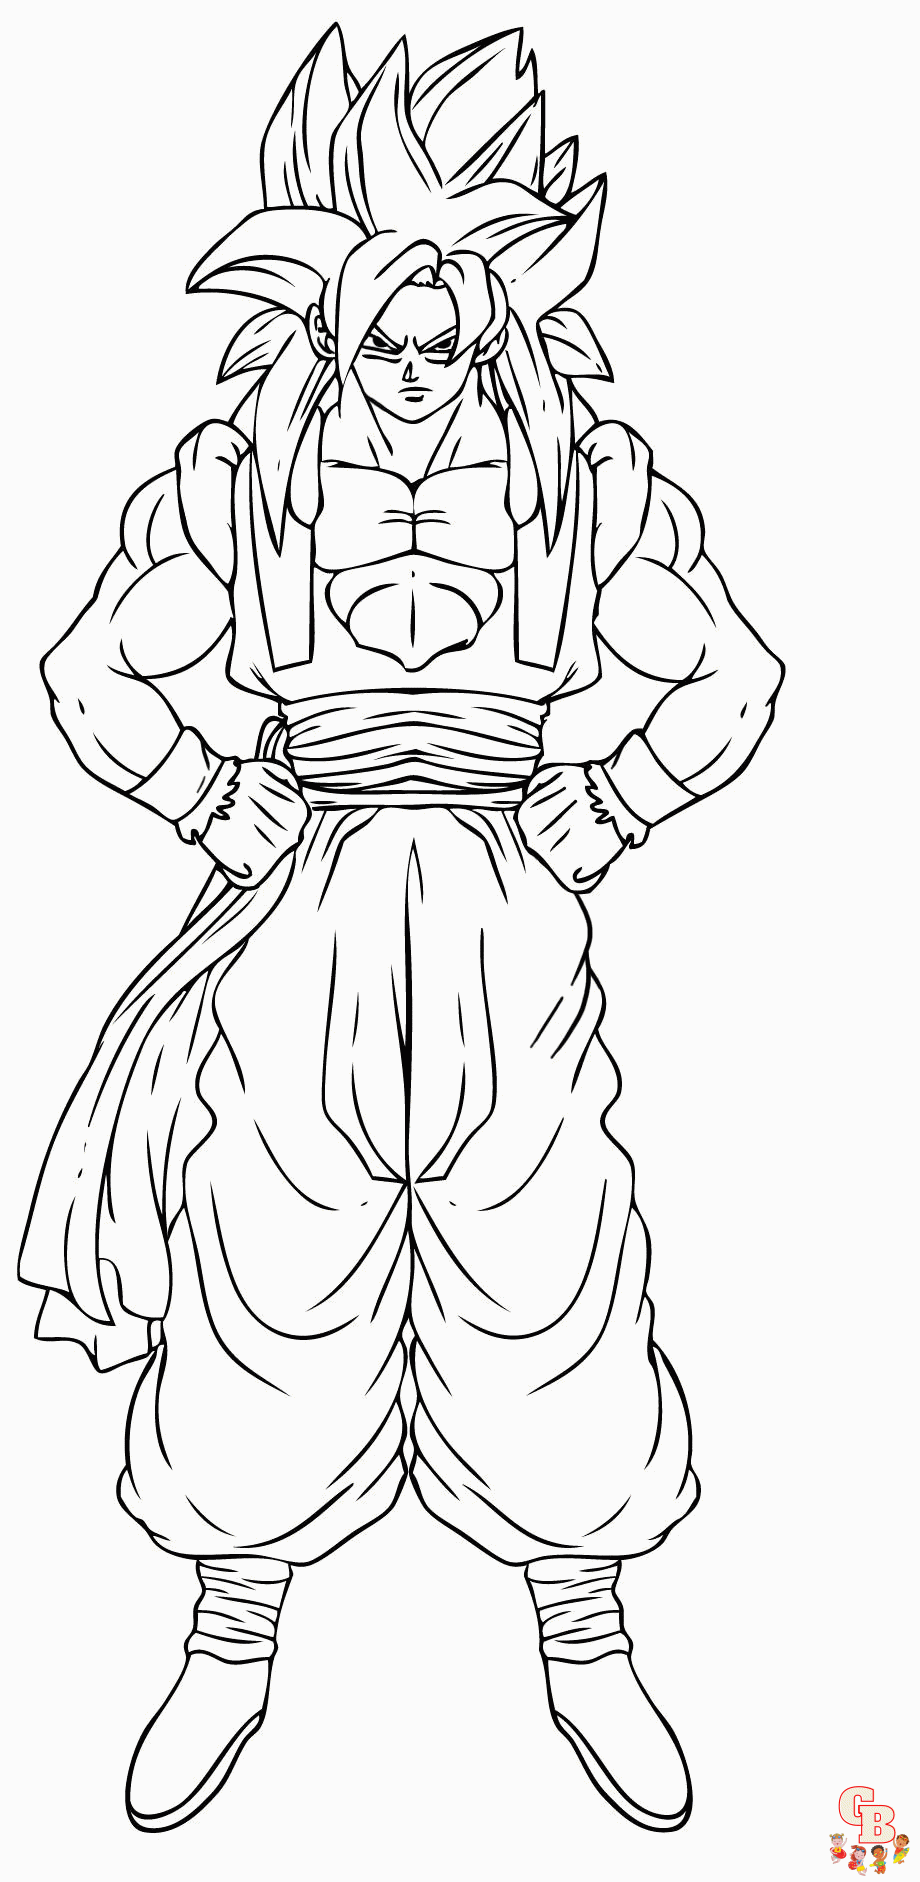 Hogeta Coloring Pages